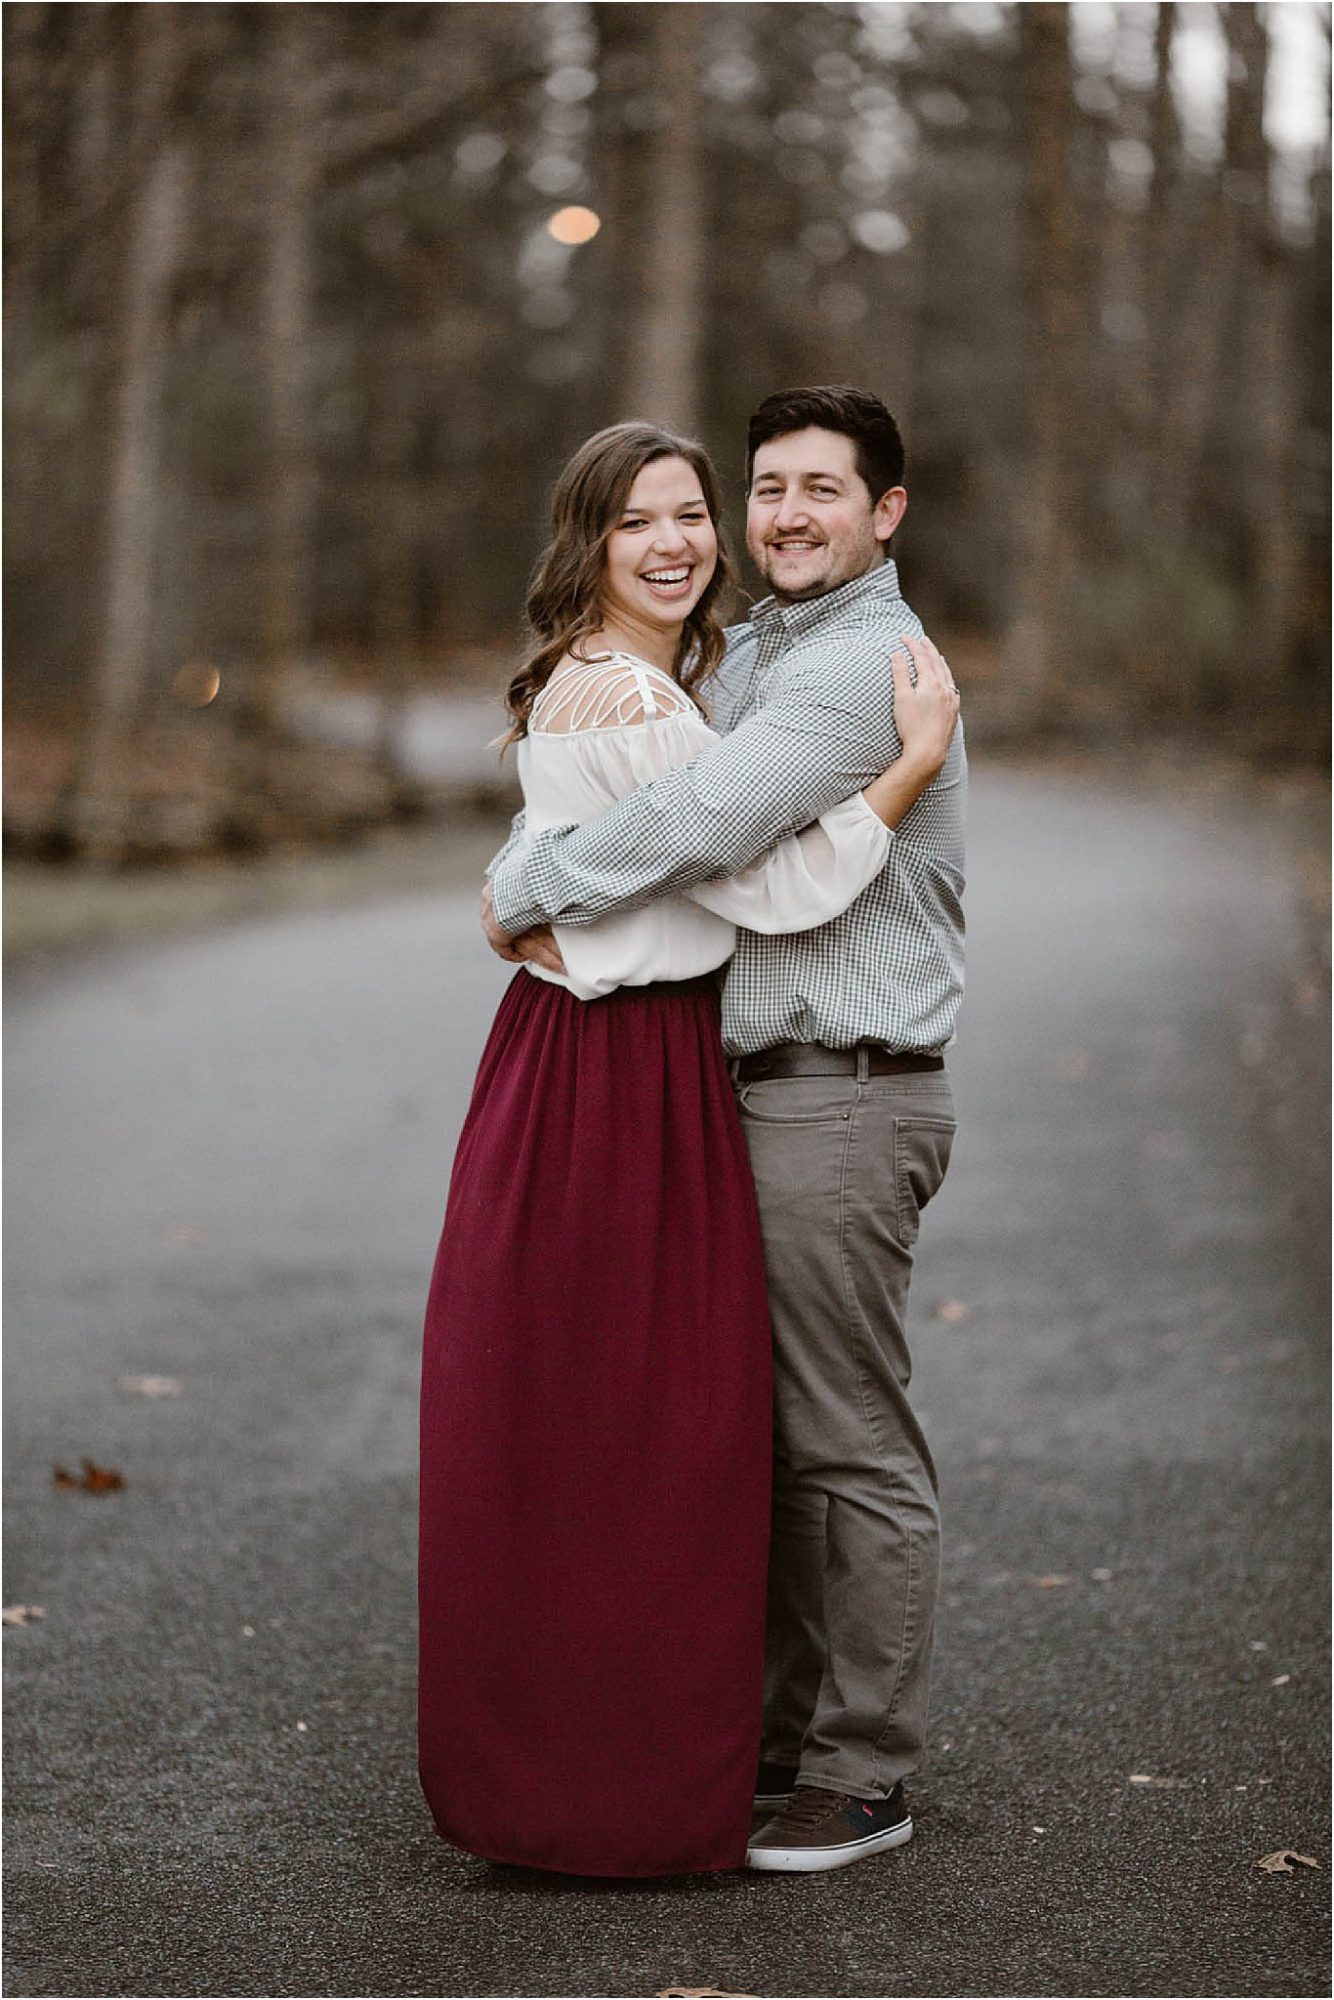 Winter engagement photos in Townsend, Tennessee